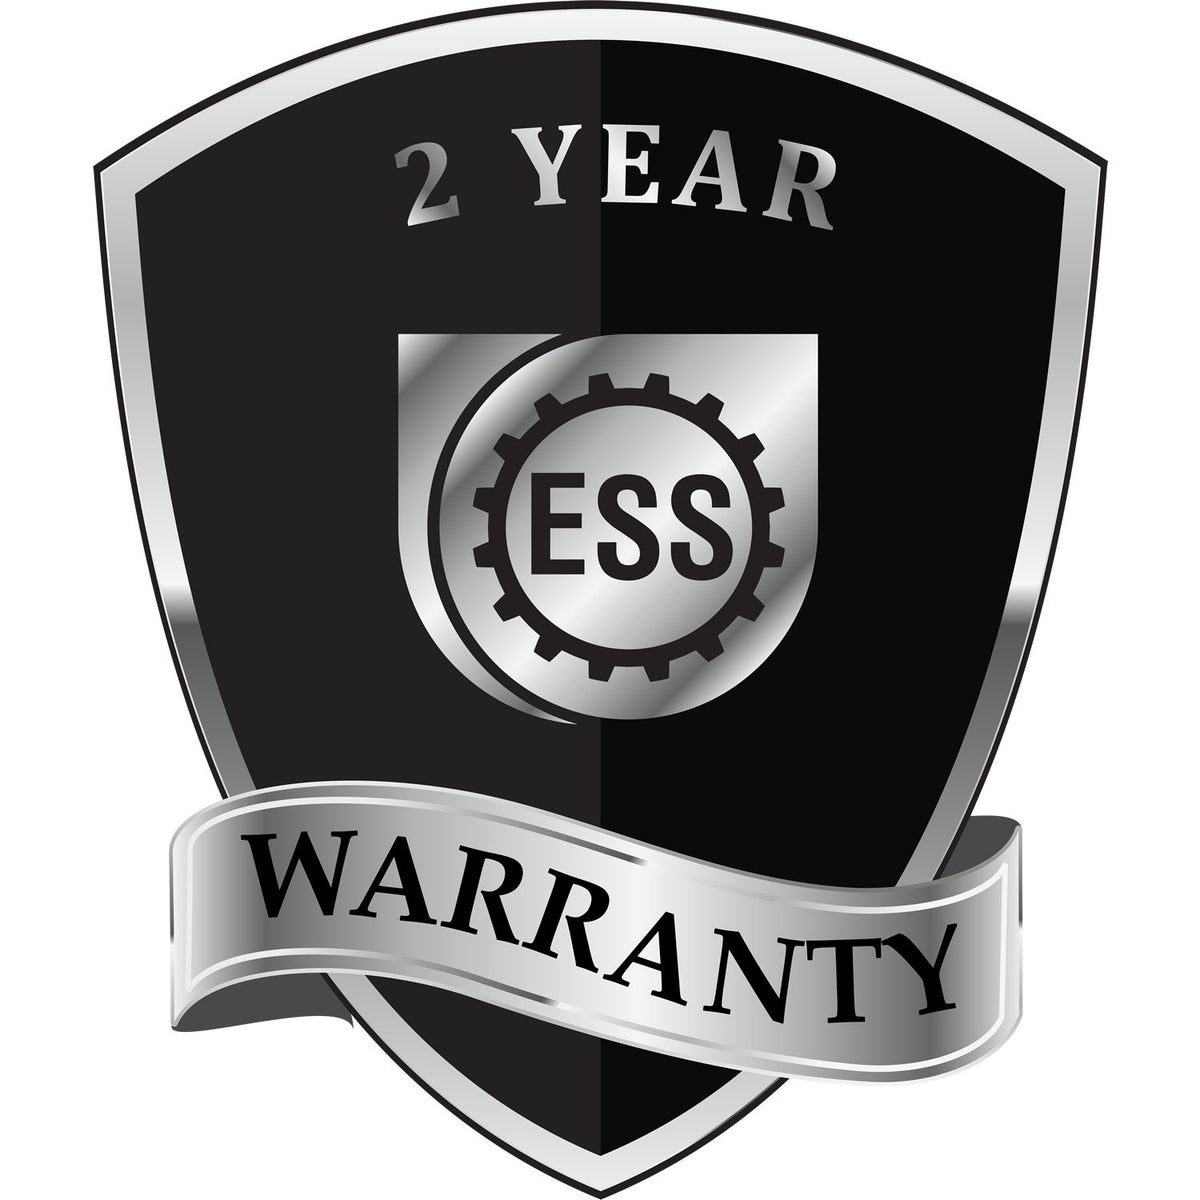 A black and silver badge or emblem showing warranty information for the Gift Nebraska Architect Seal